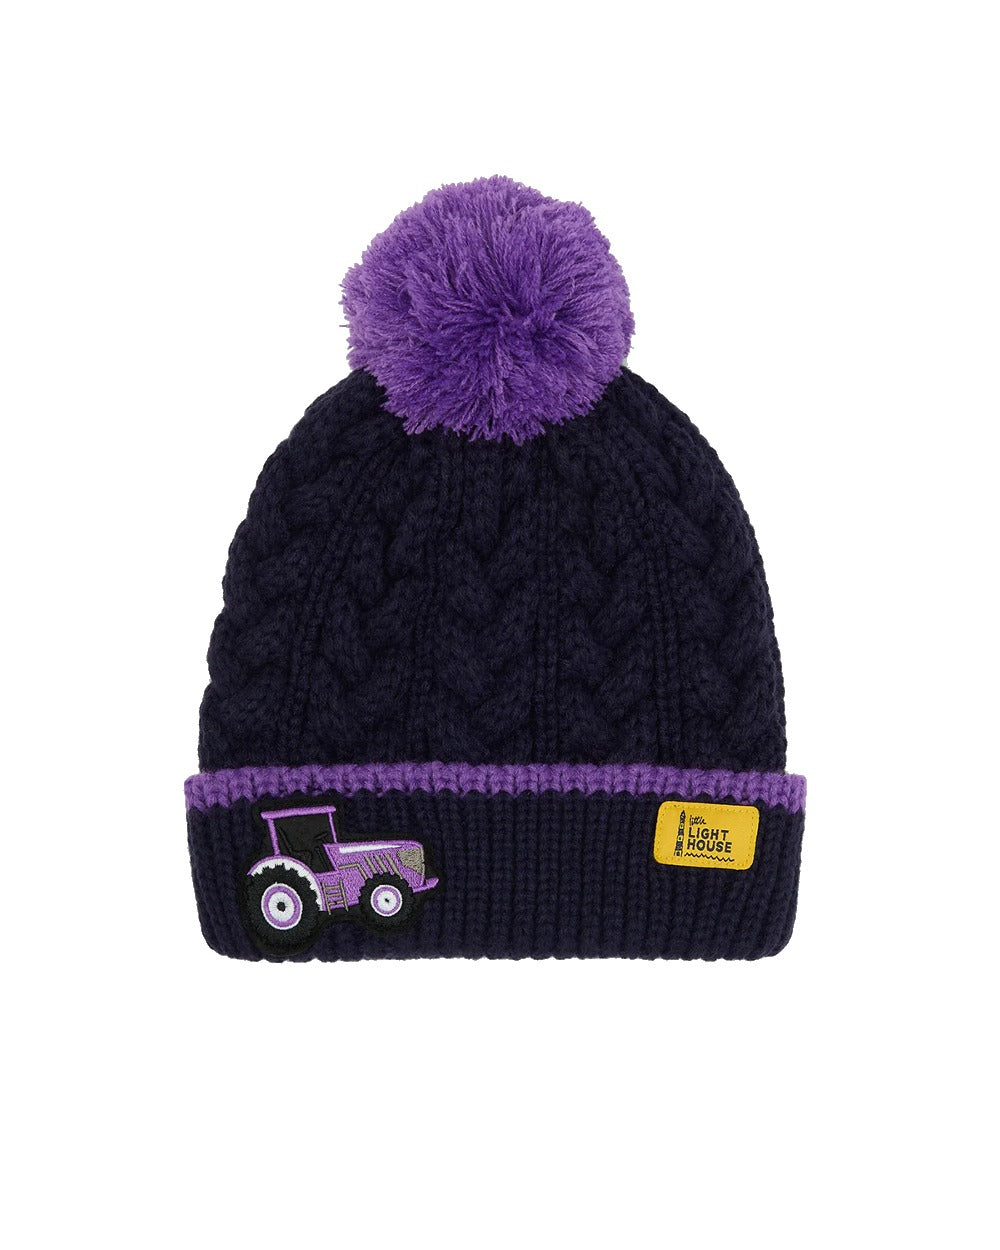 Lighthouse Childrens Bobbie Bobble Hat in Purple Tractor 